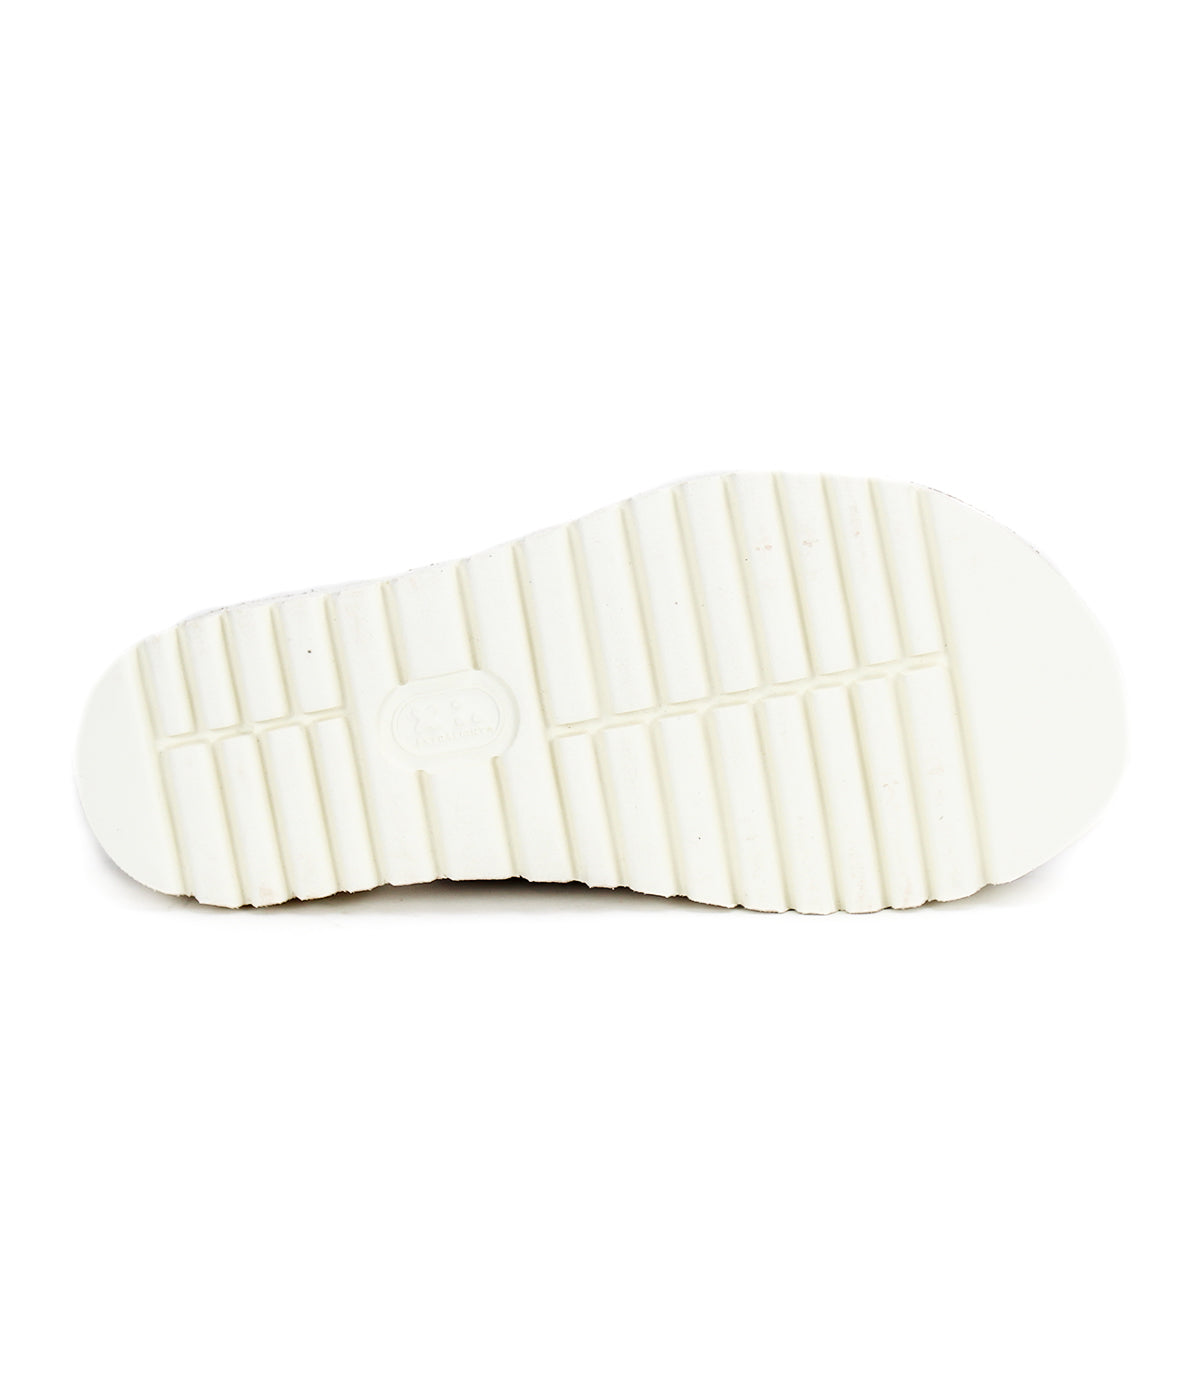 A white leather Fairlee II slide sandal with a comfortable and stylish sole by Bed Stu.